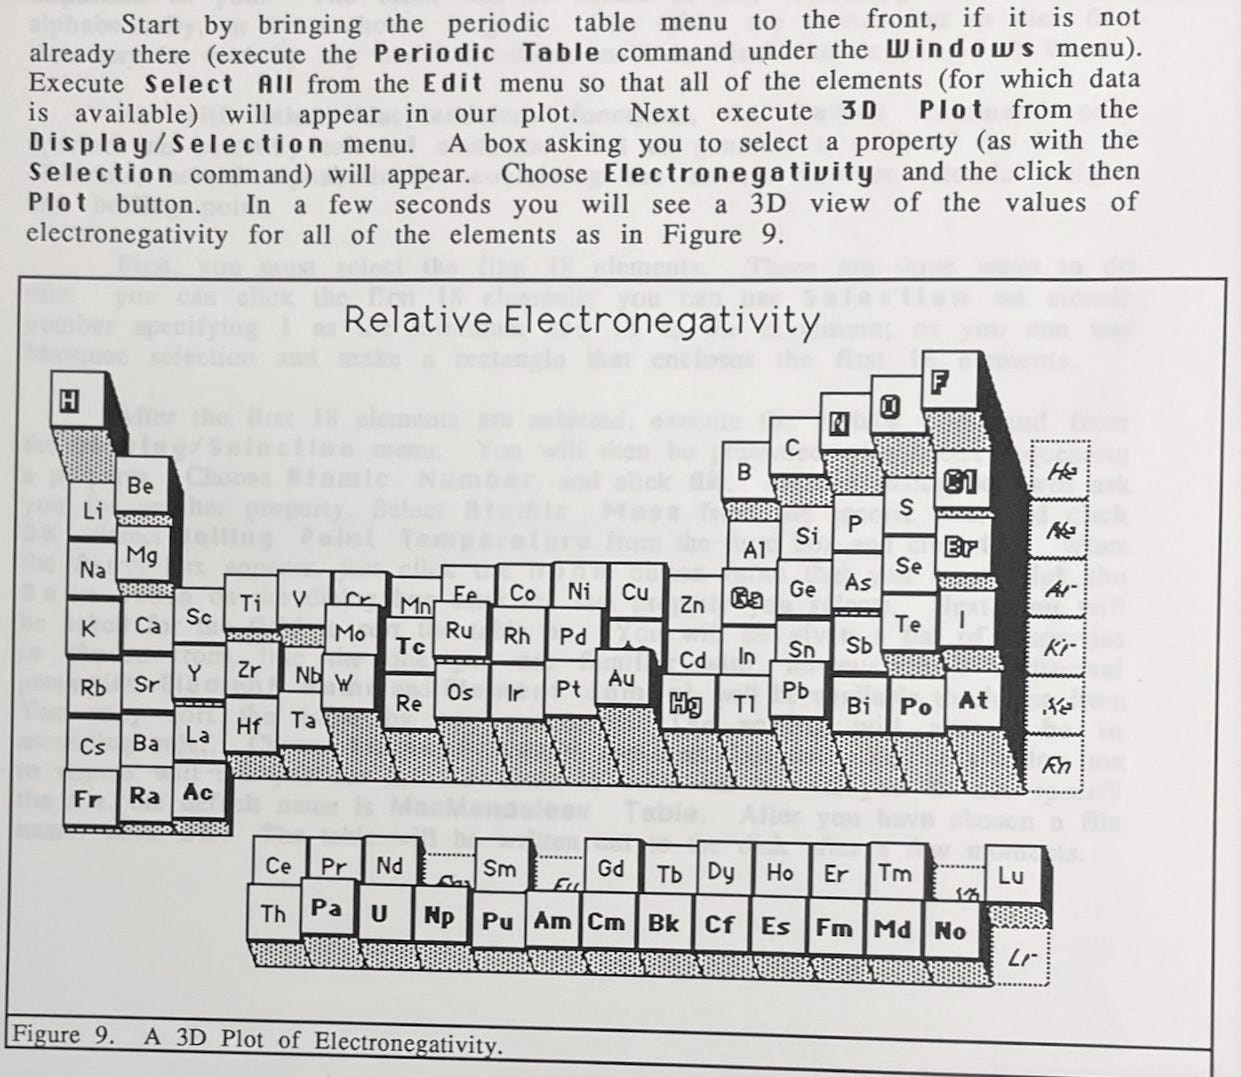 Some instructions on using the product MacMendeleev along with an image of the periodic table of elements where each element is raised as a bar chart relative to electronegativity value.